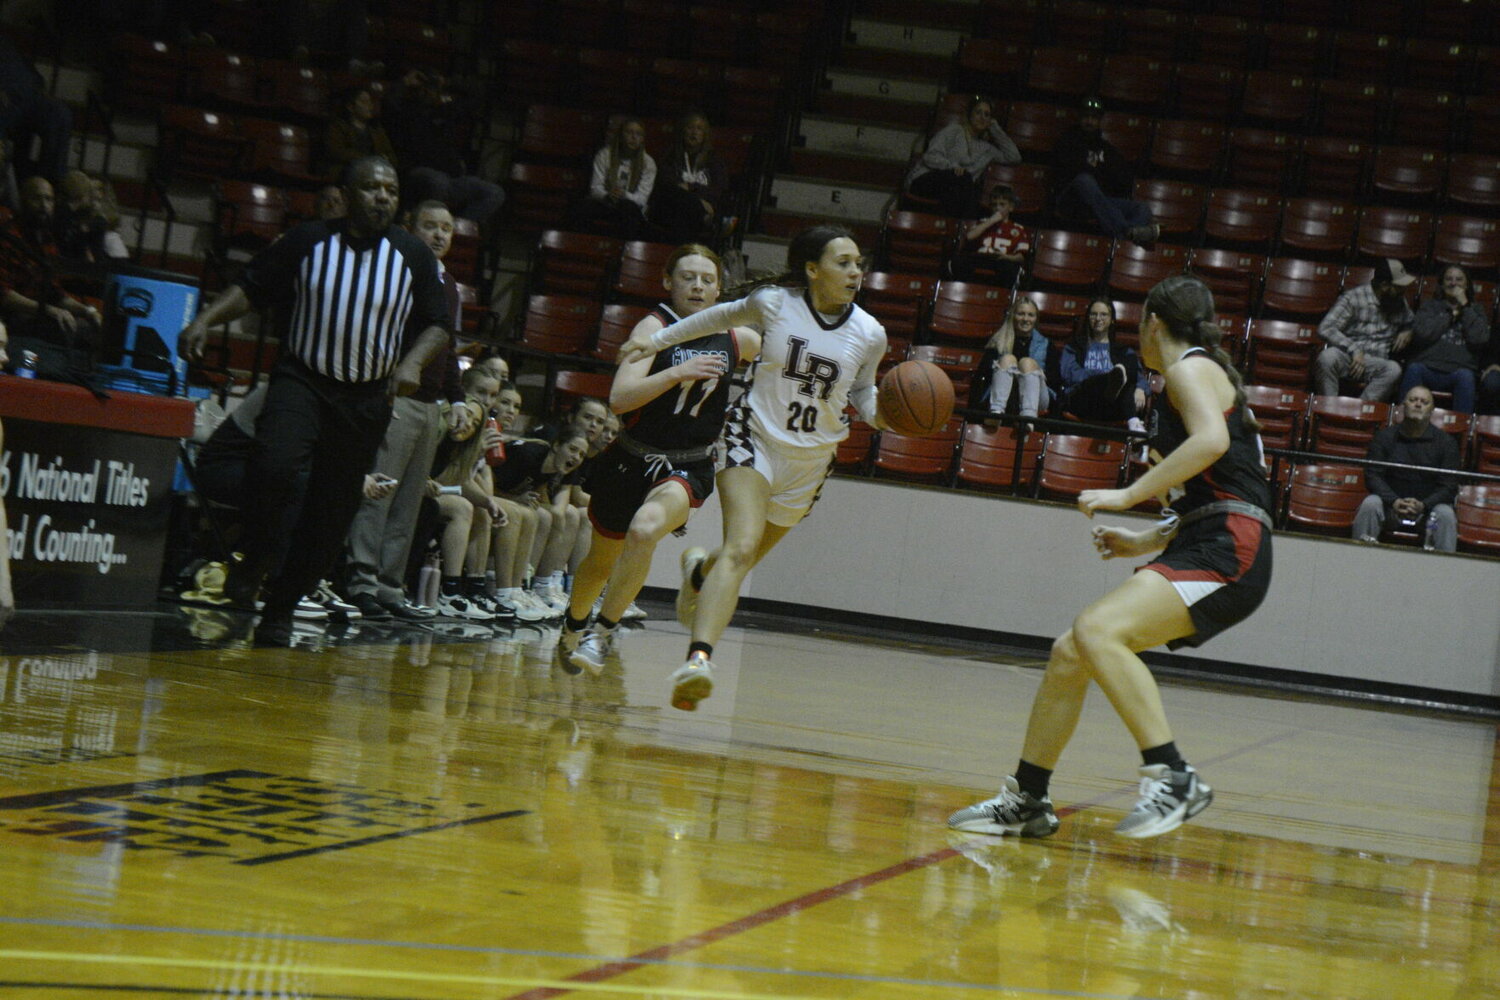 Senior Sienna Clark takes it up the court for the Lady Cats on Saturday, Dec. 30 against Aurora. Rogersville lost 50-40.